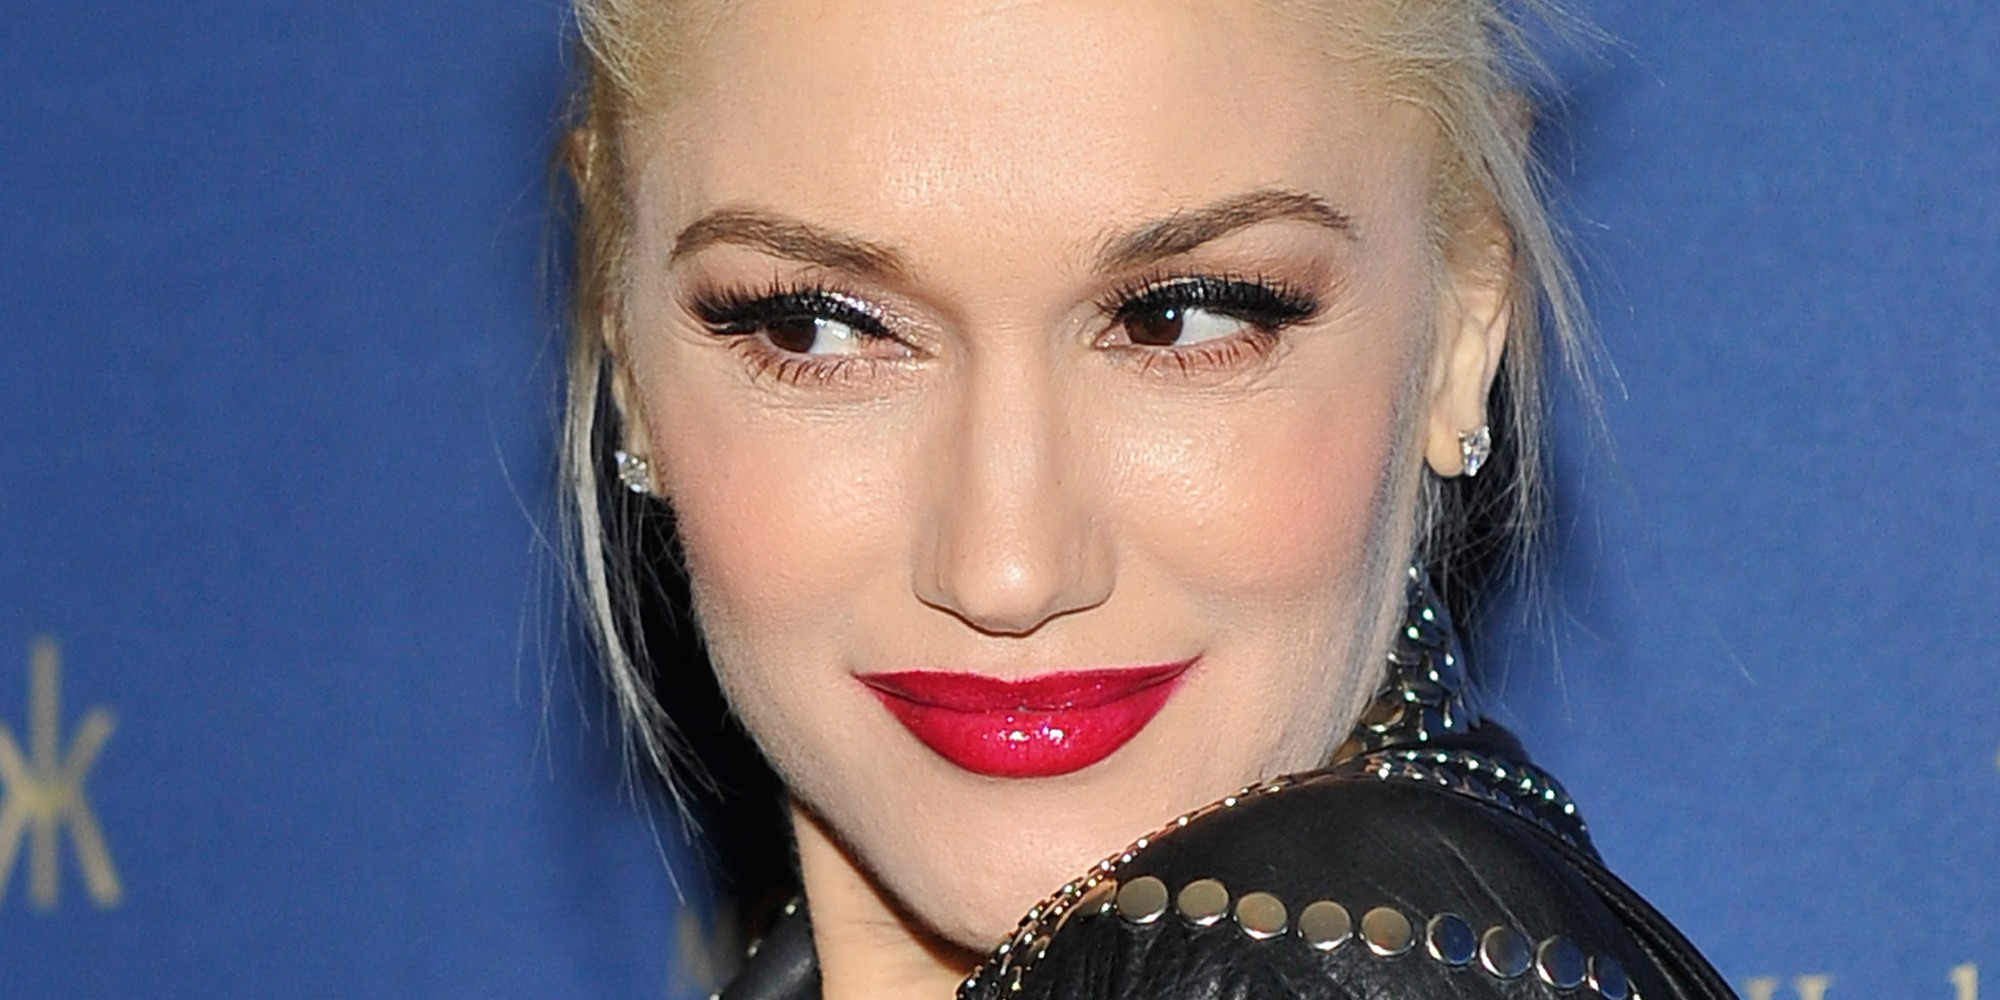 There's No Doubt Gwen Stefani Will Join 'The Voice' HuffPost